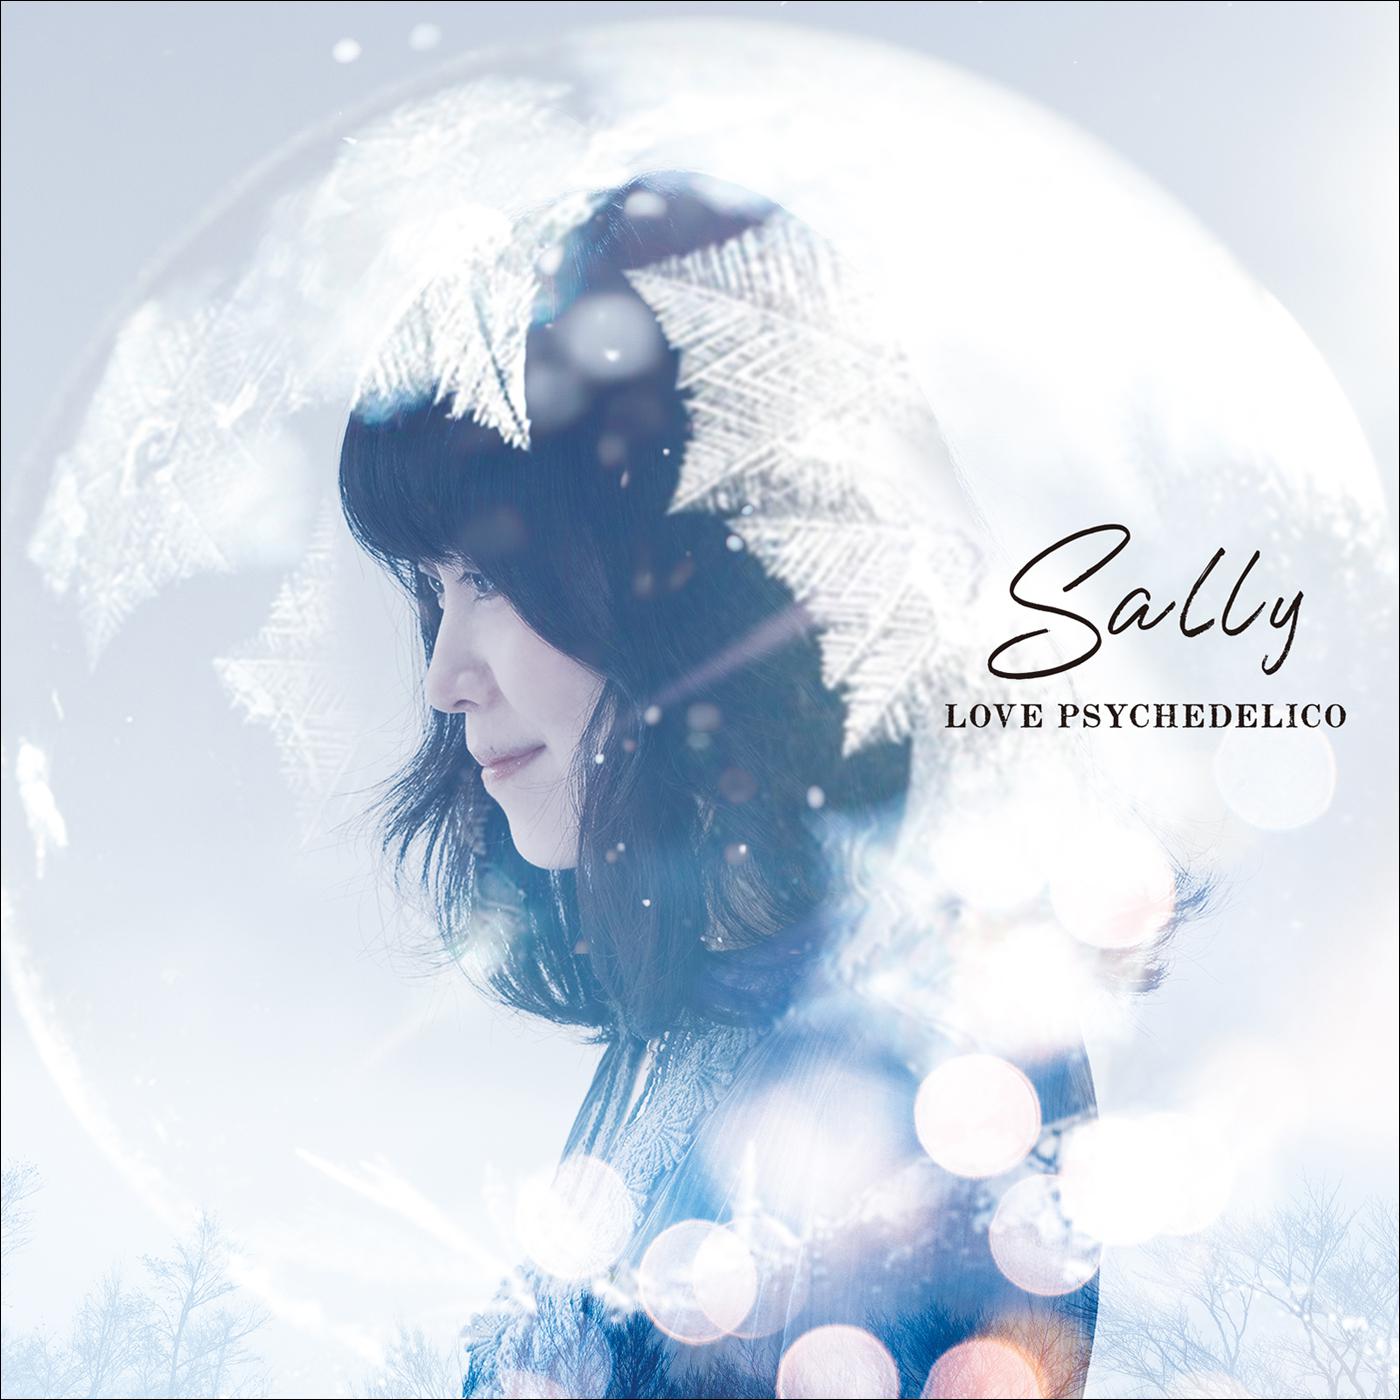 Sally Love Psychedelico 单曲 网易云音乐